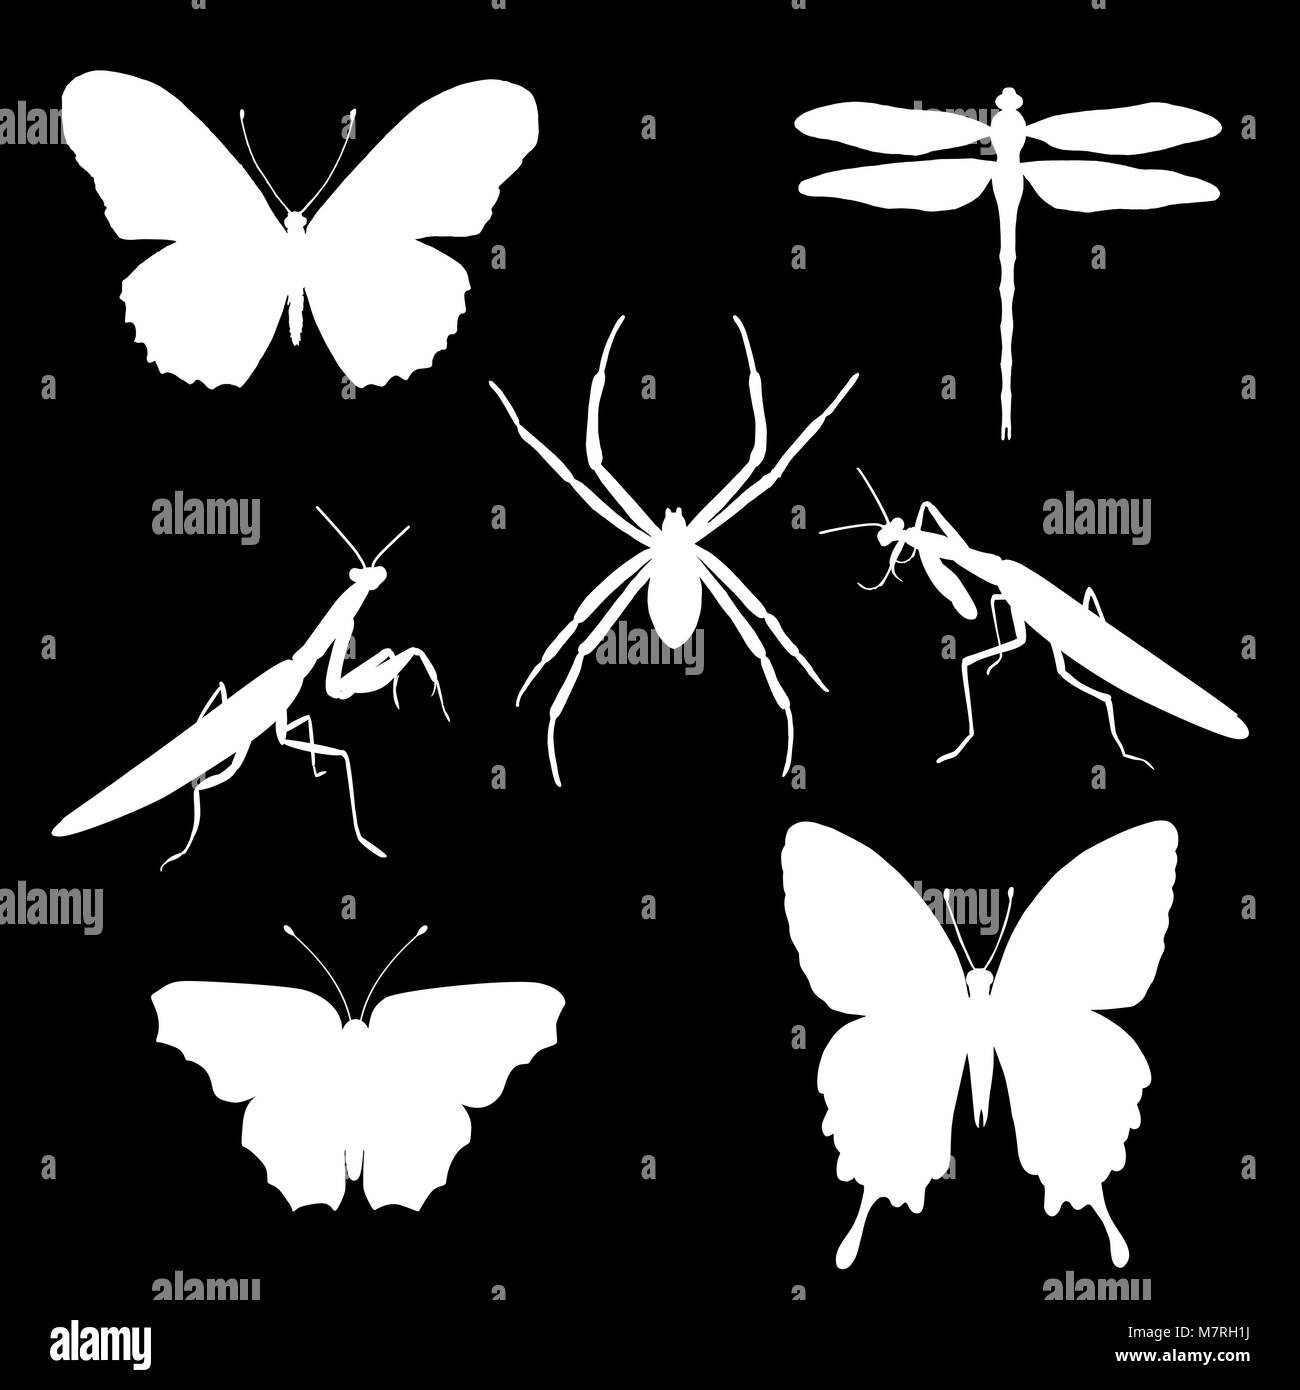 Vector set of silhouettes of insects - butterflies, spider, mantises, dragonfly. Insect silhouette Stock Vector